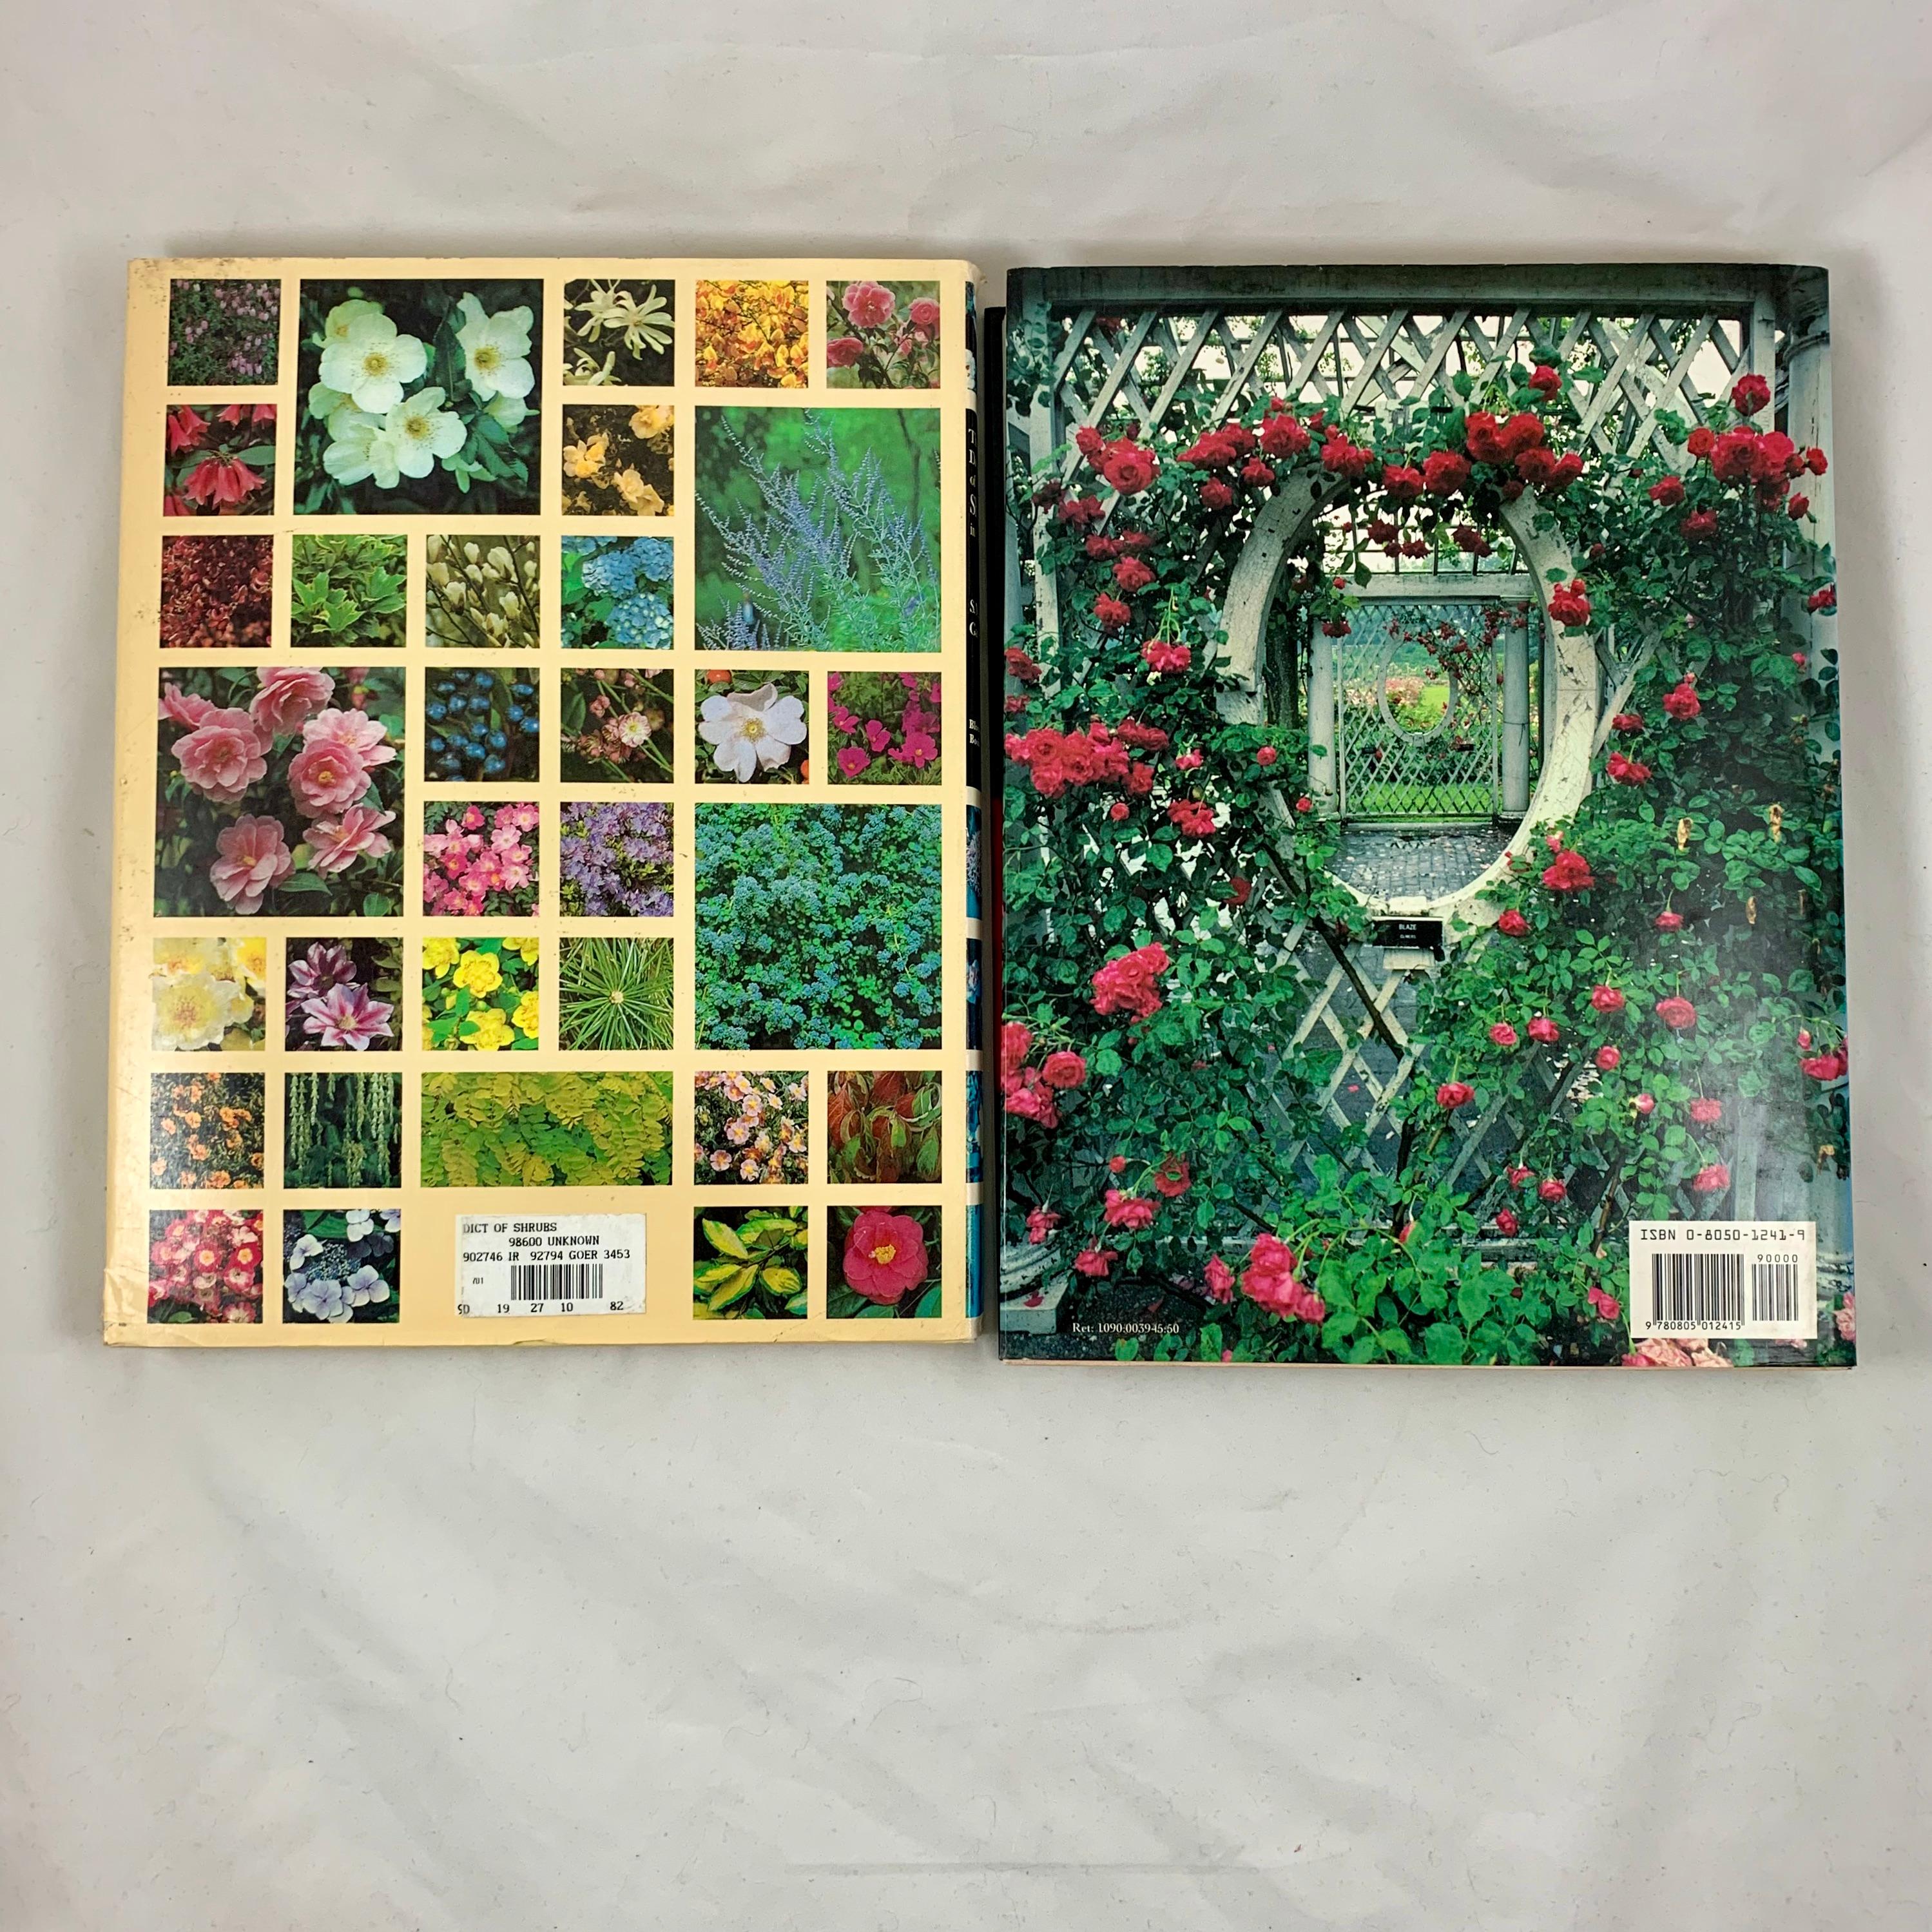 20th Century Gardening Roses, Herbs, Shrubs, Vegetables, Fruit Trees, Collection of 5 Books For Sale